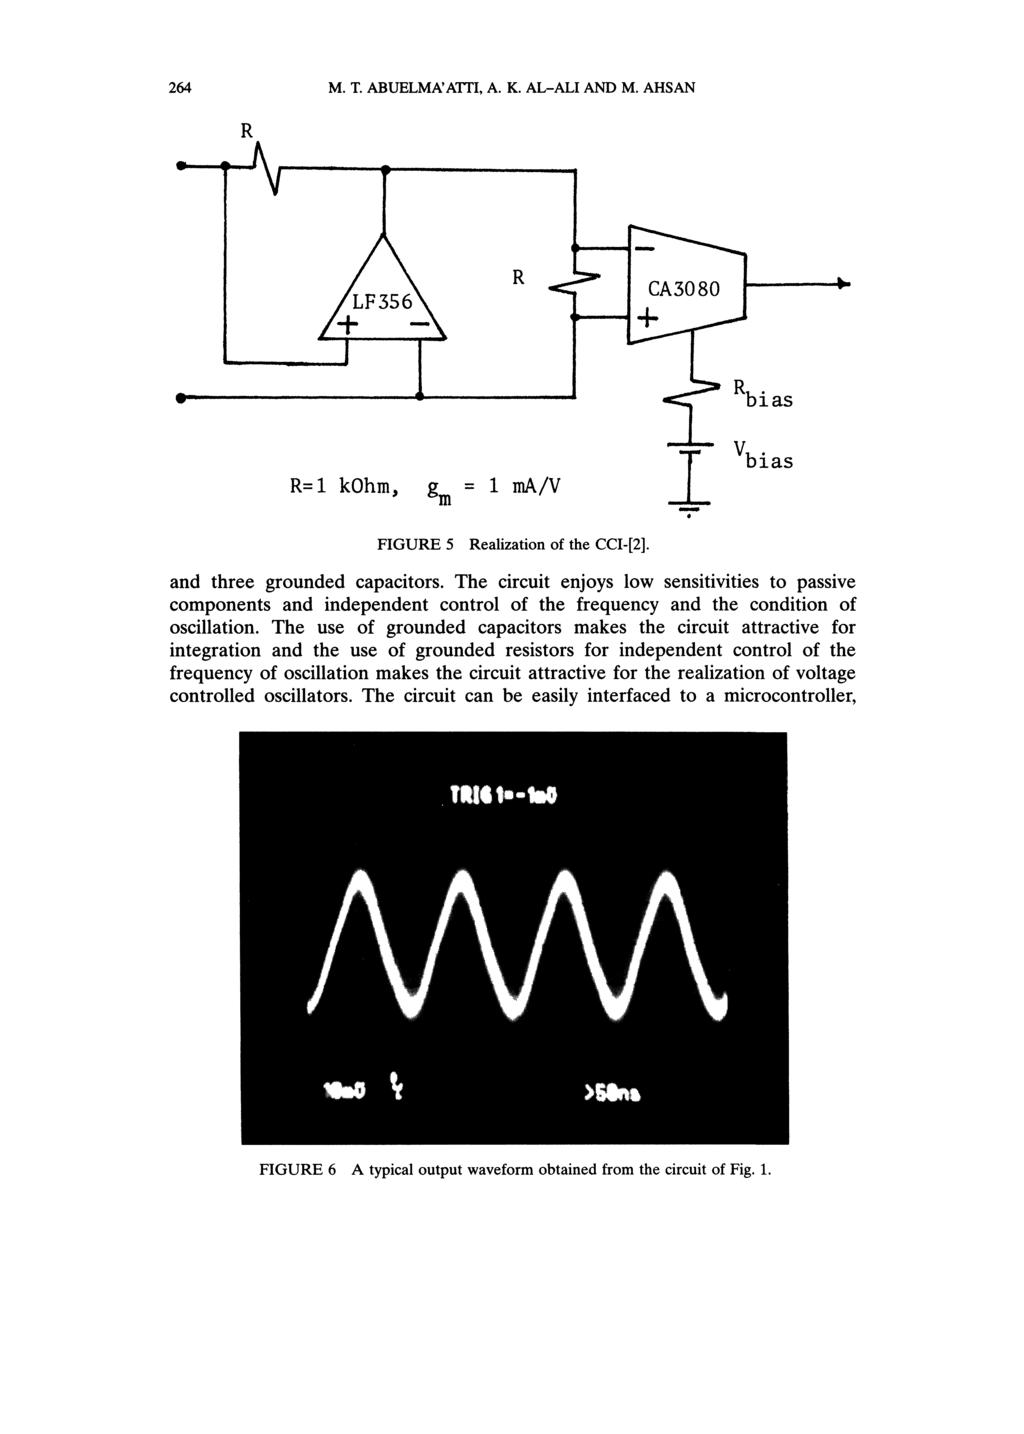 264 M.T. ABUELMA ATTI, A. K. AL-ALI AND M. AHSAN CA3080 Rb i as R=I kohm, gm 1 ma/v FIGURE 5 Realization of the CCI-[2]. and three grounded capacitors.